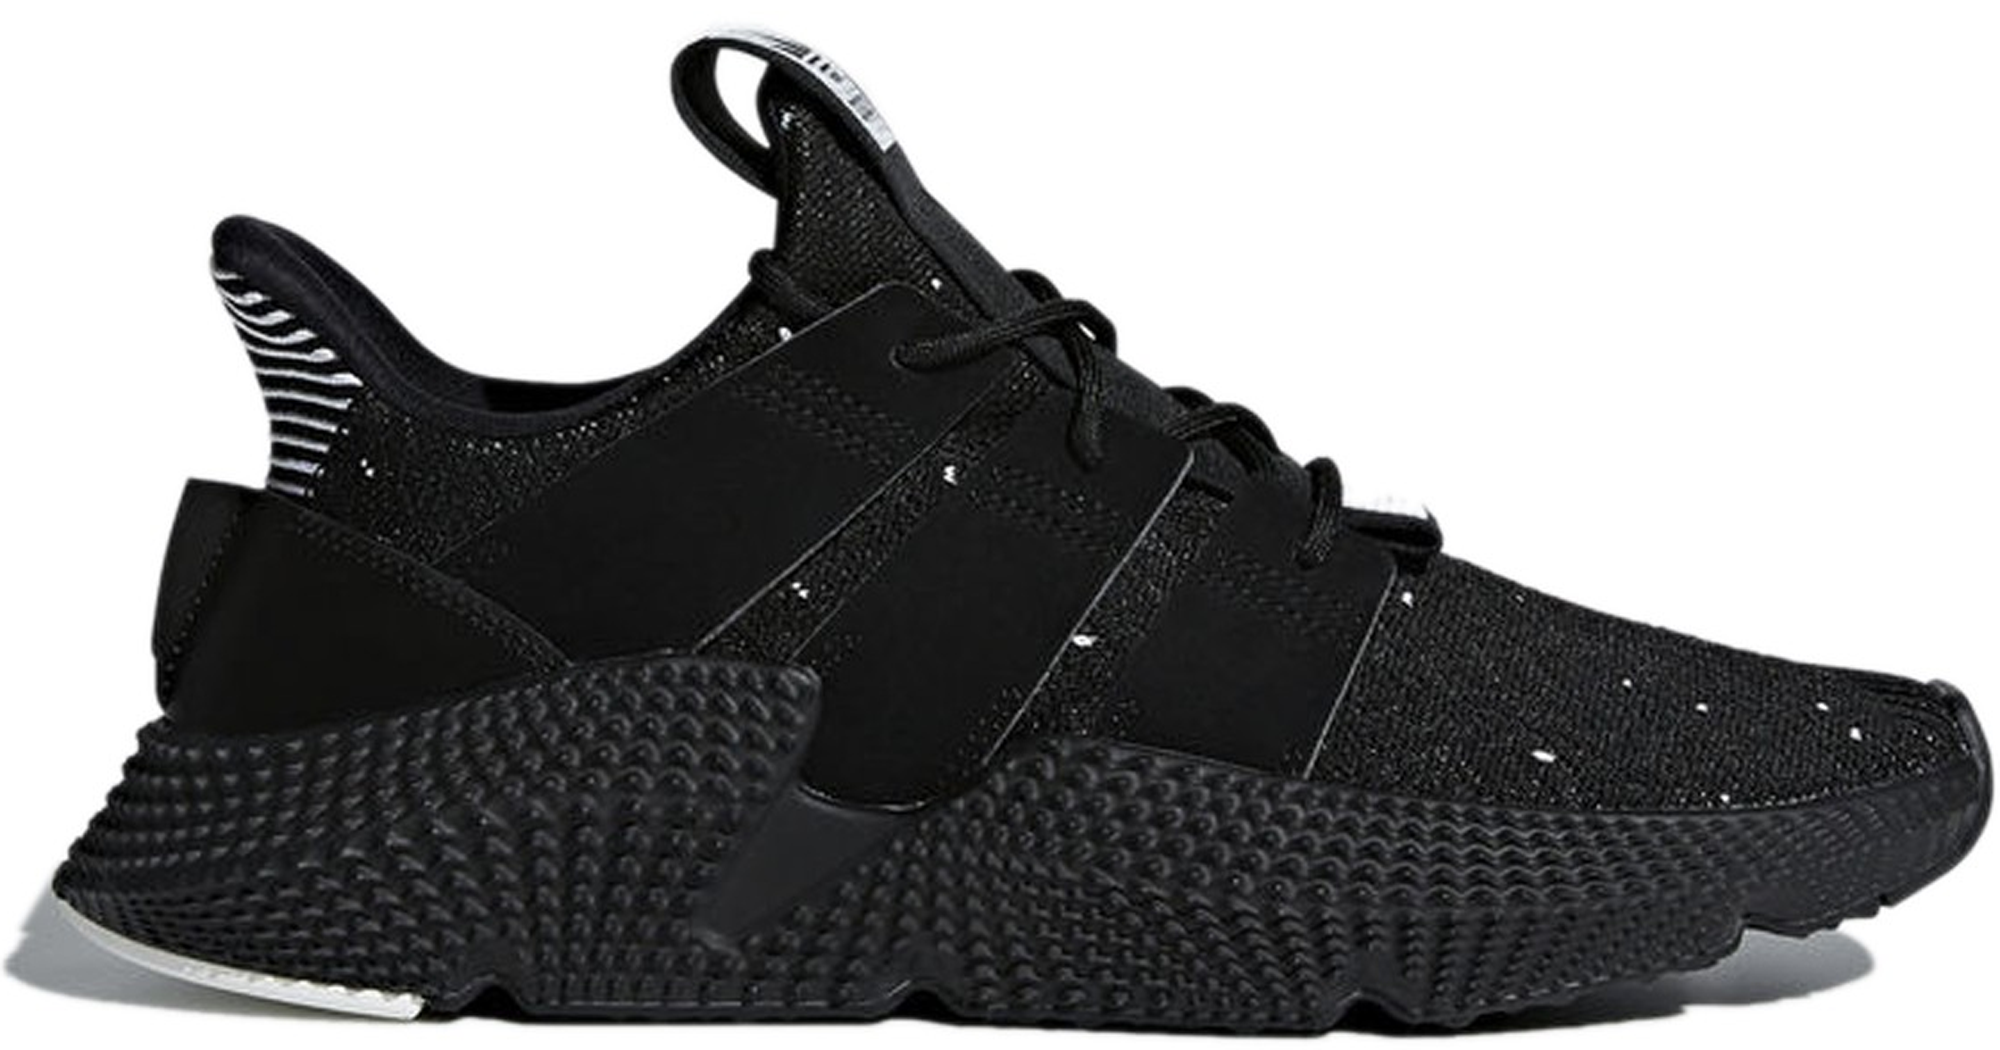 black and white prophere